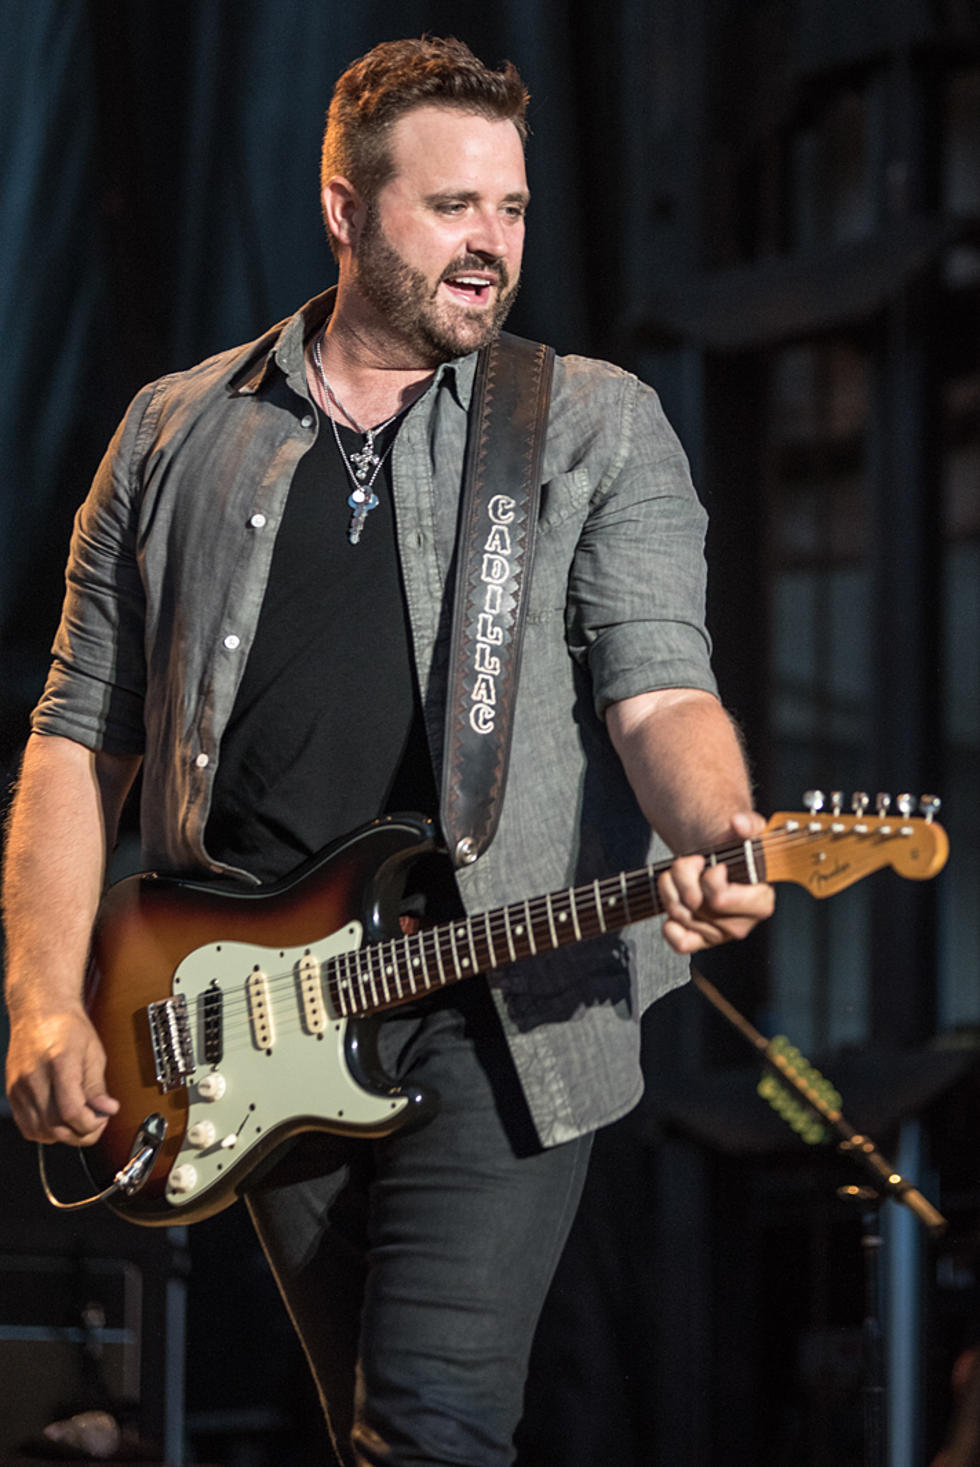 Randy Houser Is ‘Fired Up’ for New Album, Out in March